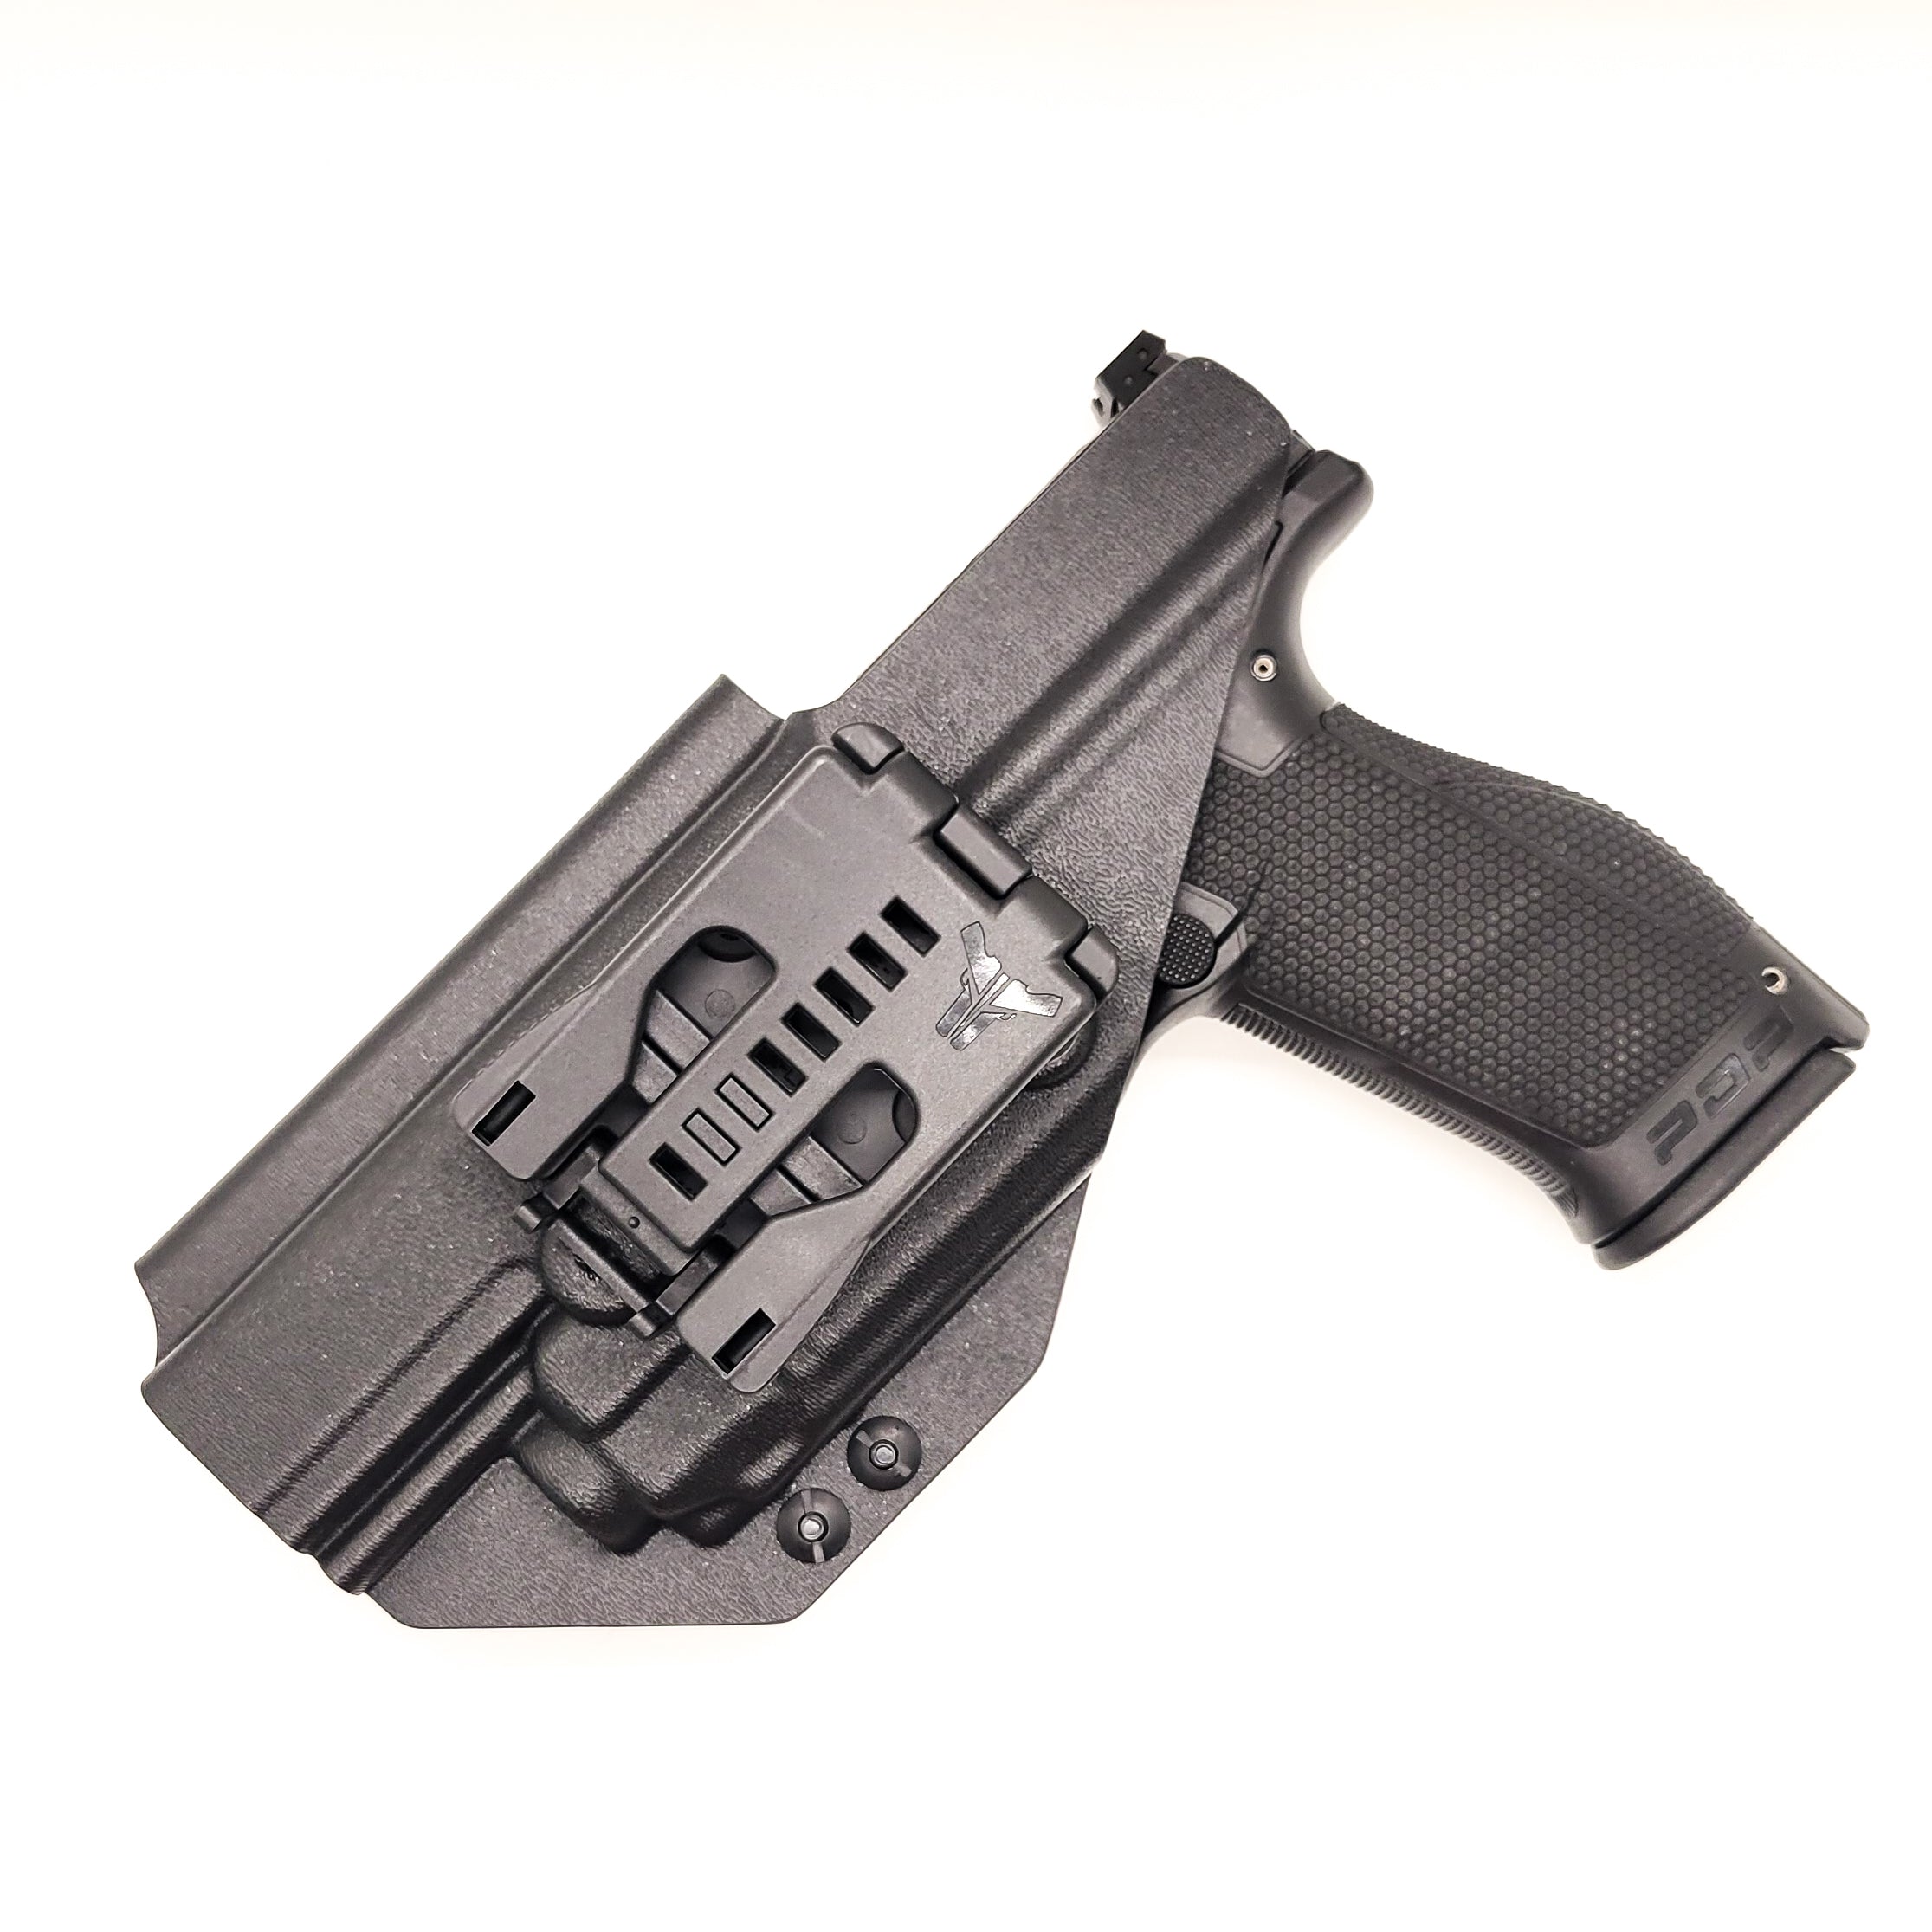 For the best Outside Waistband Taco Style Holster designed to fit the Walther PDP Compact 5" pistol with the Streamlight TLR-8 mounted on the firearm, shop Four Brothers Holsters. Cut for red dot sight, full sweat guard, adjustable retention & open muzzle for threaded barrels & compensators.